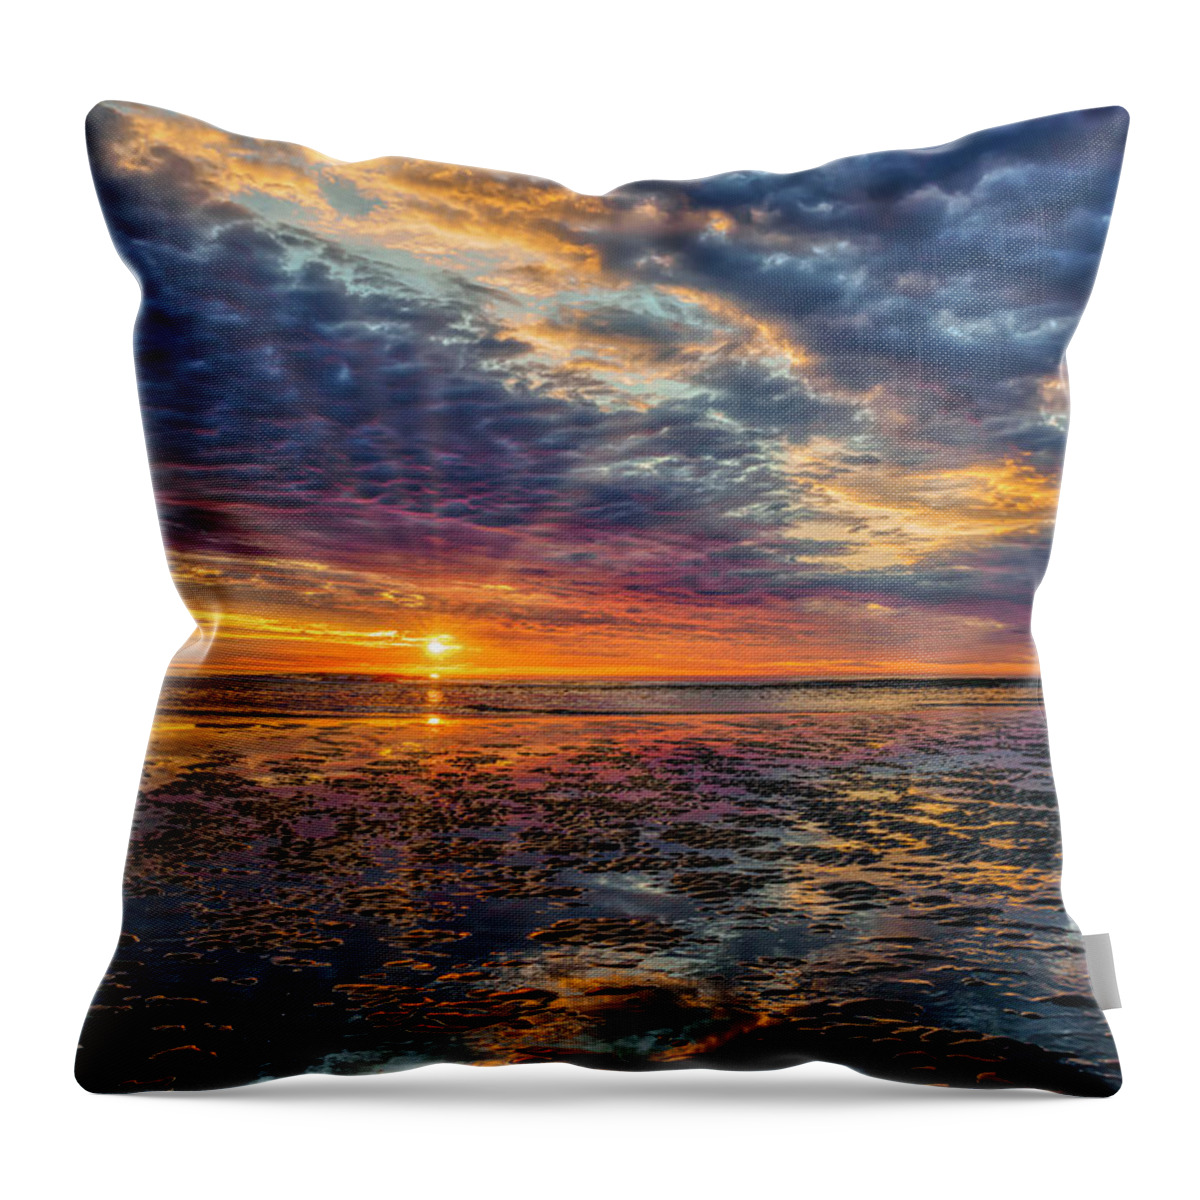 Sunrise Throw Pillow featuring the photograph An Ogunquit Sunrise by Penny Polakoff